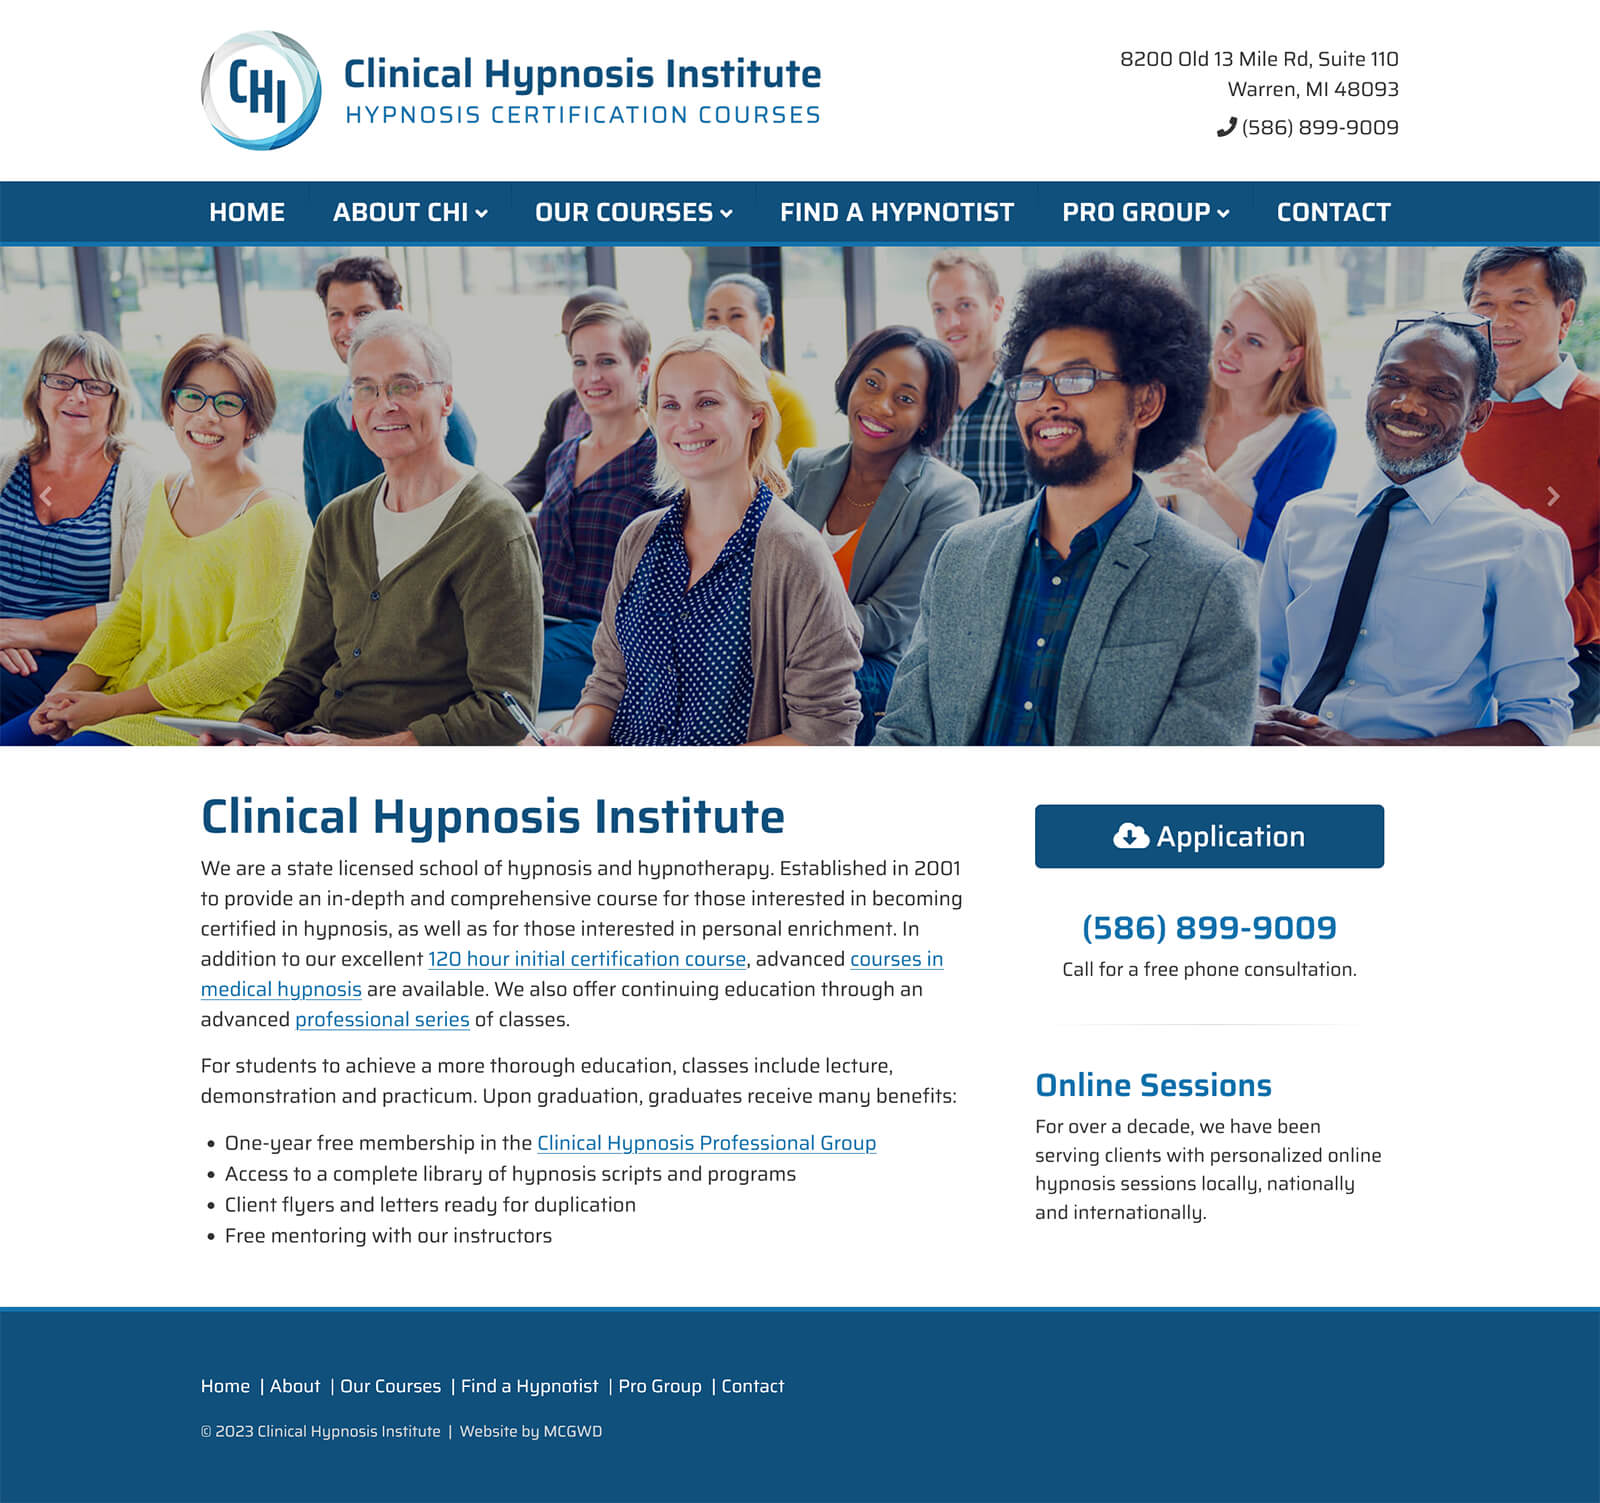 Clinical Hypnosis Institute